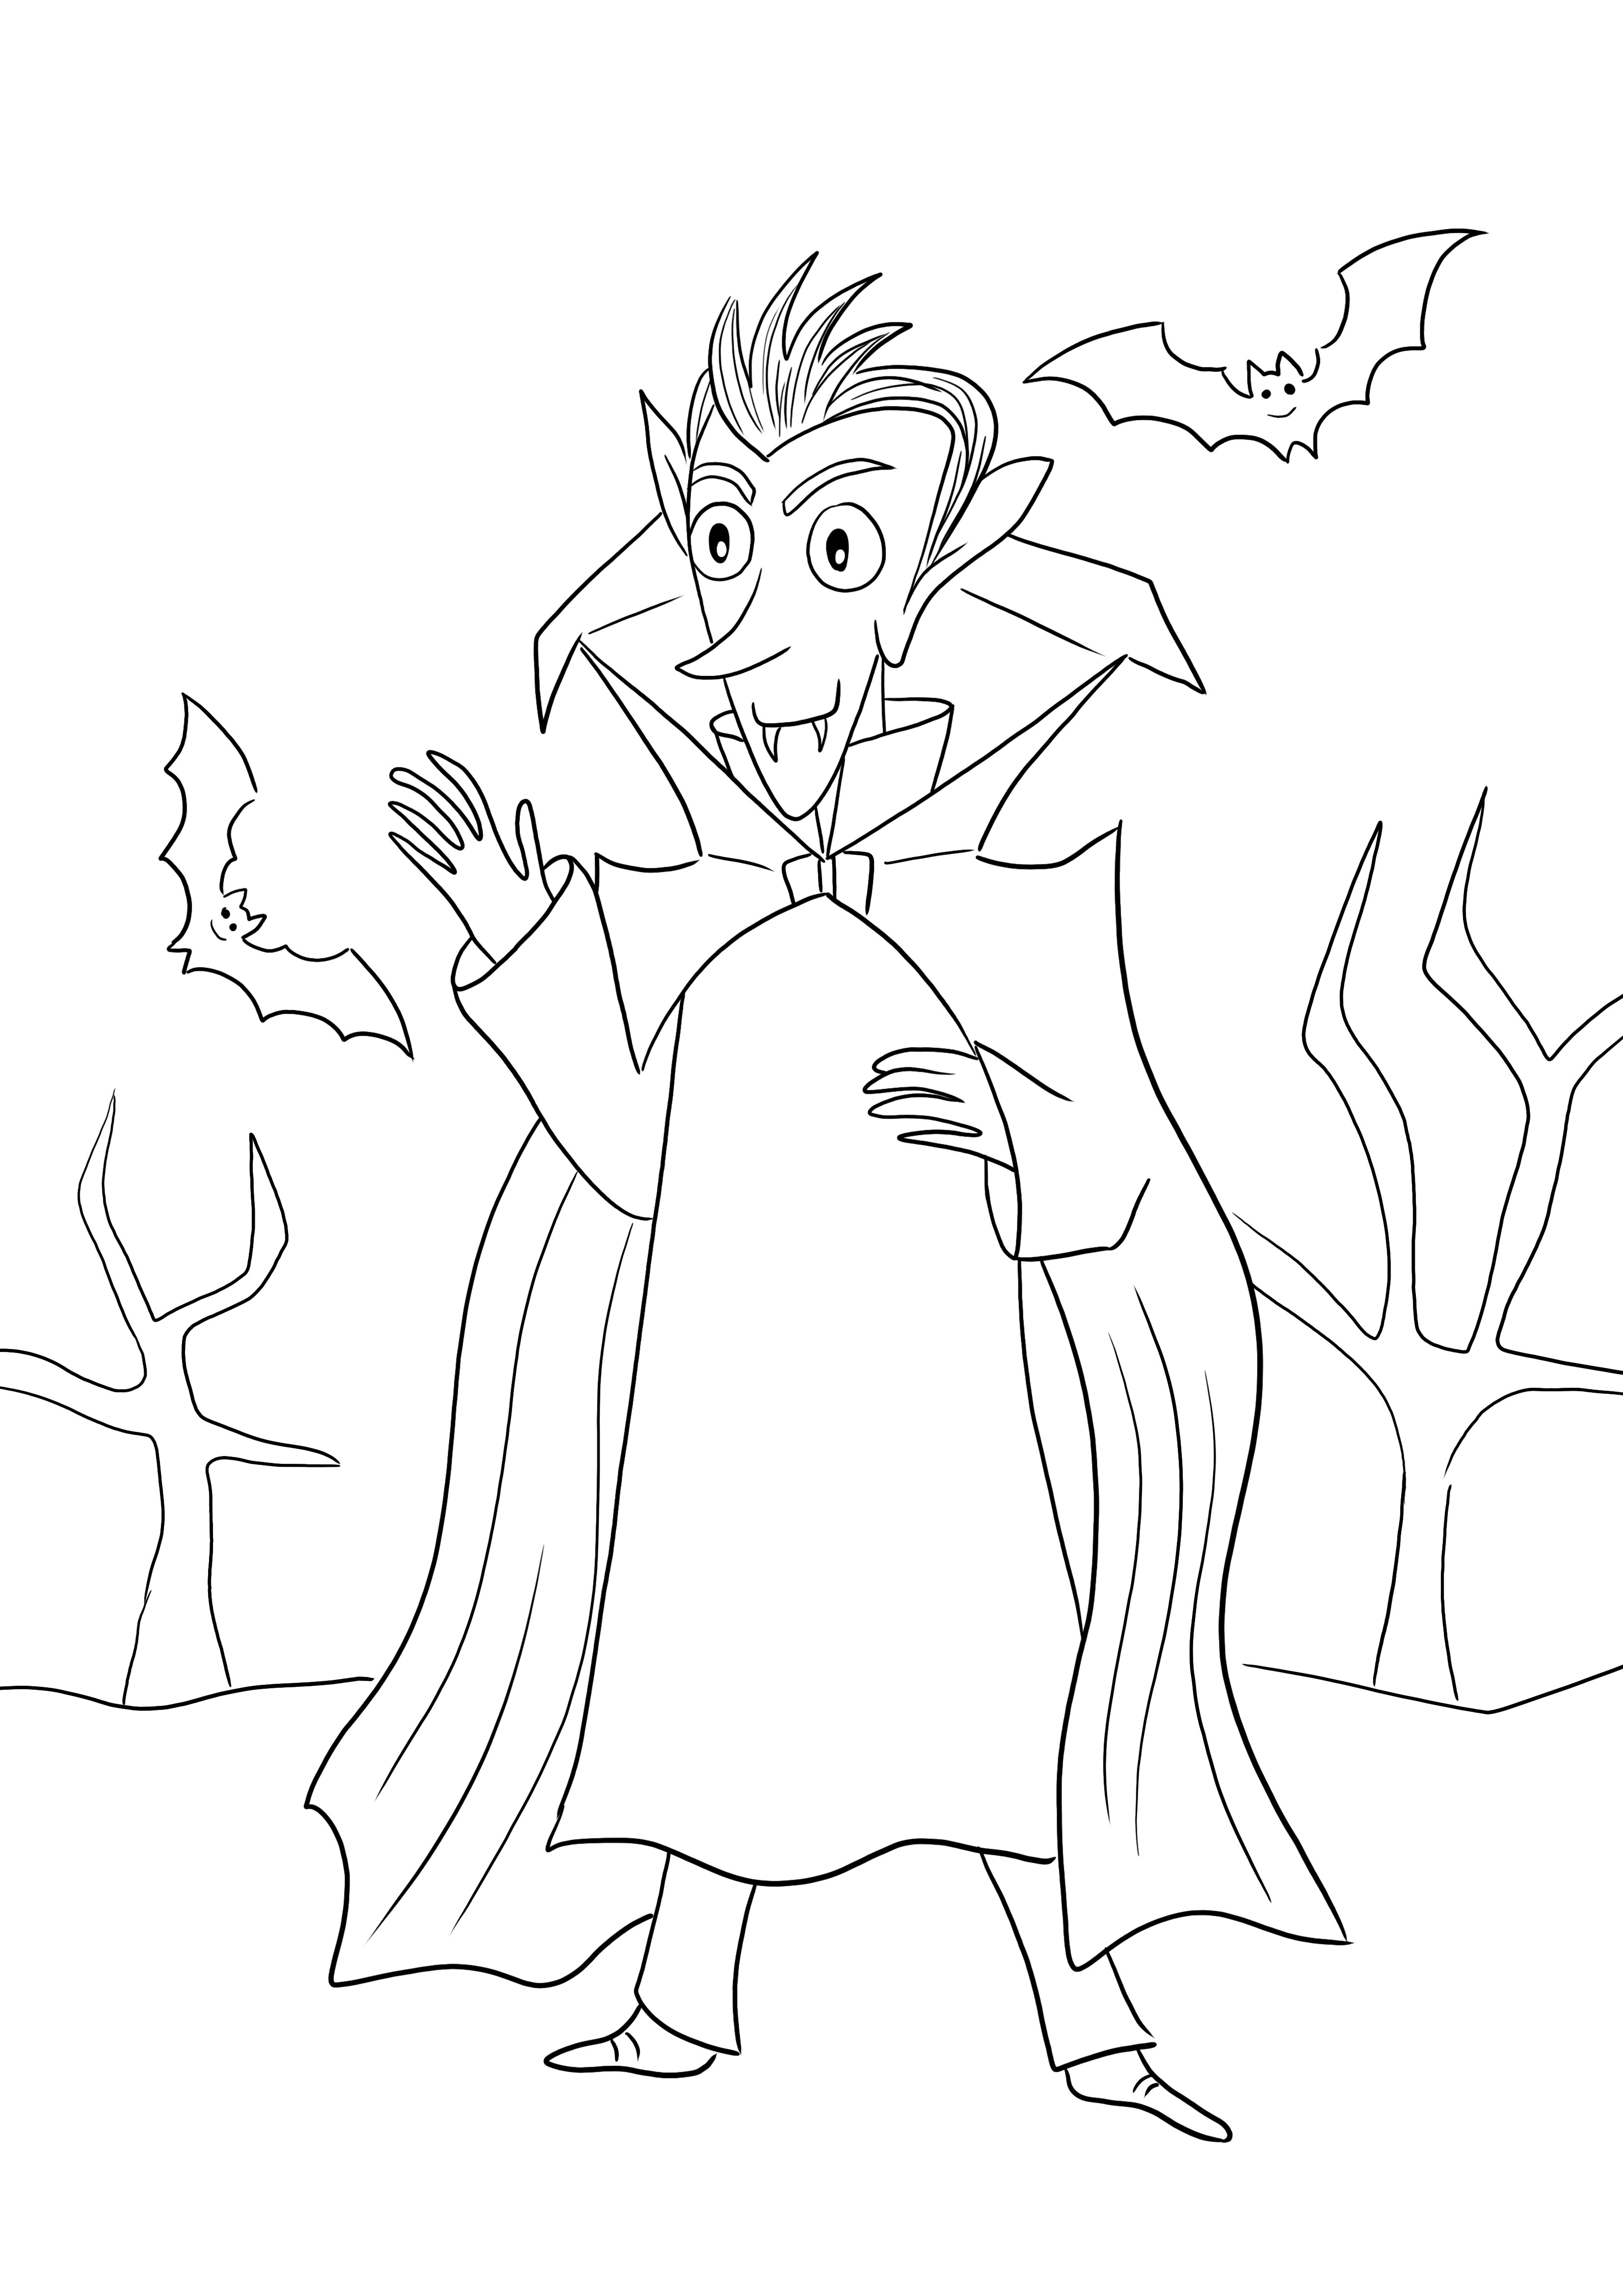 Vampire to print or download coloring picture to celebrate Halloween